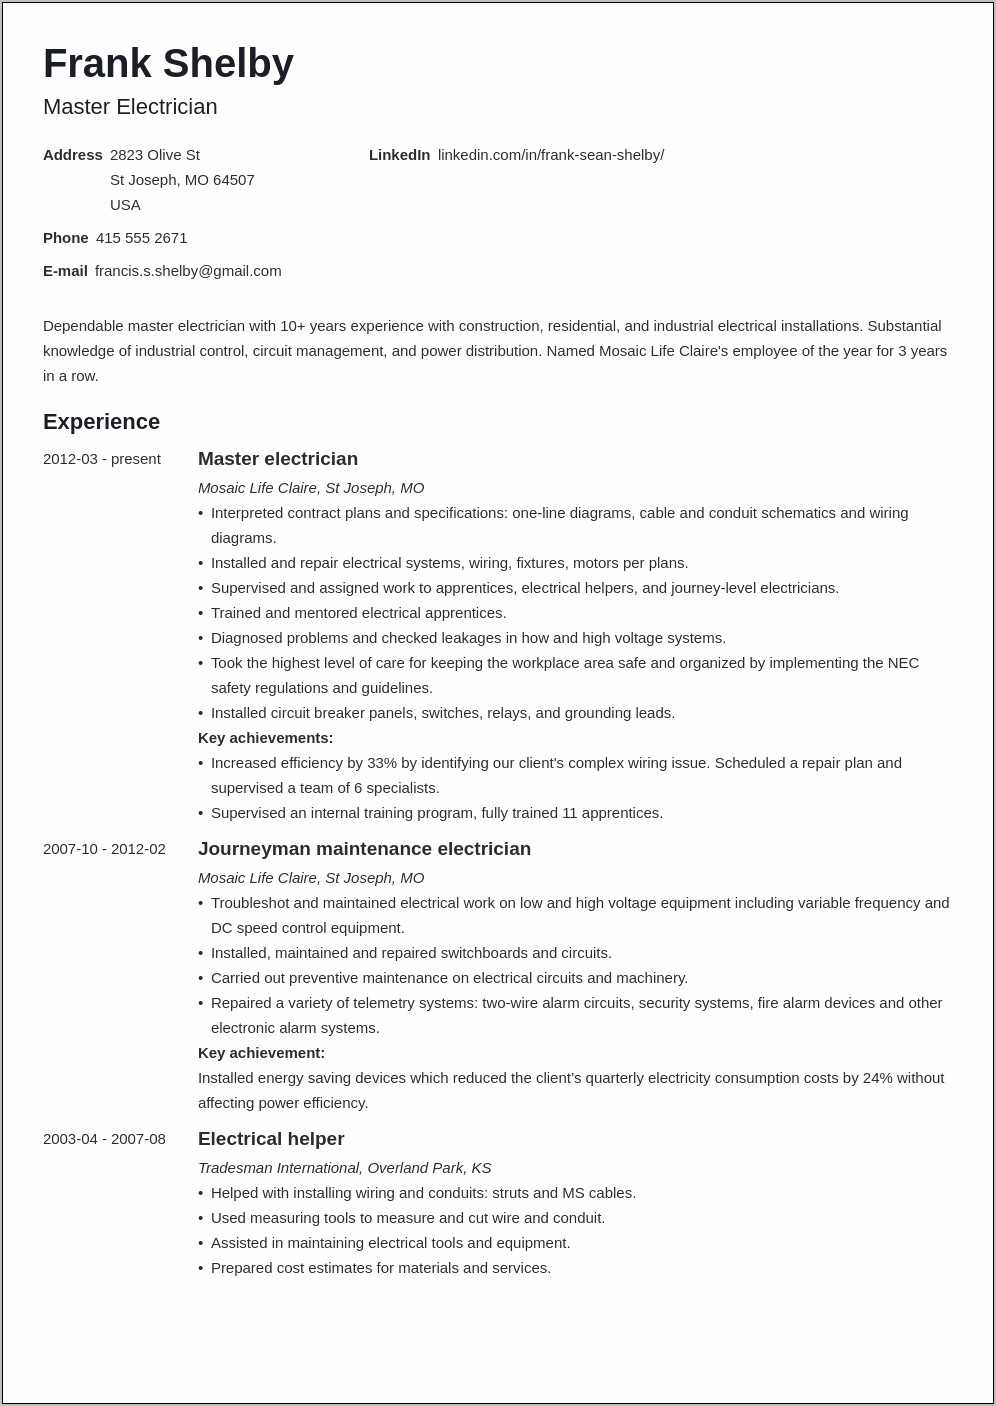 Resume Phrase Alternative To Manage Or Direct